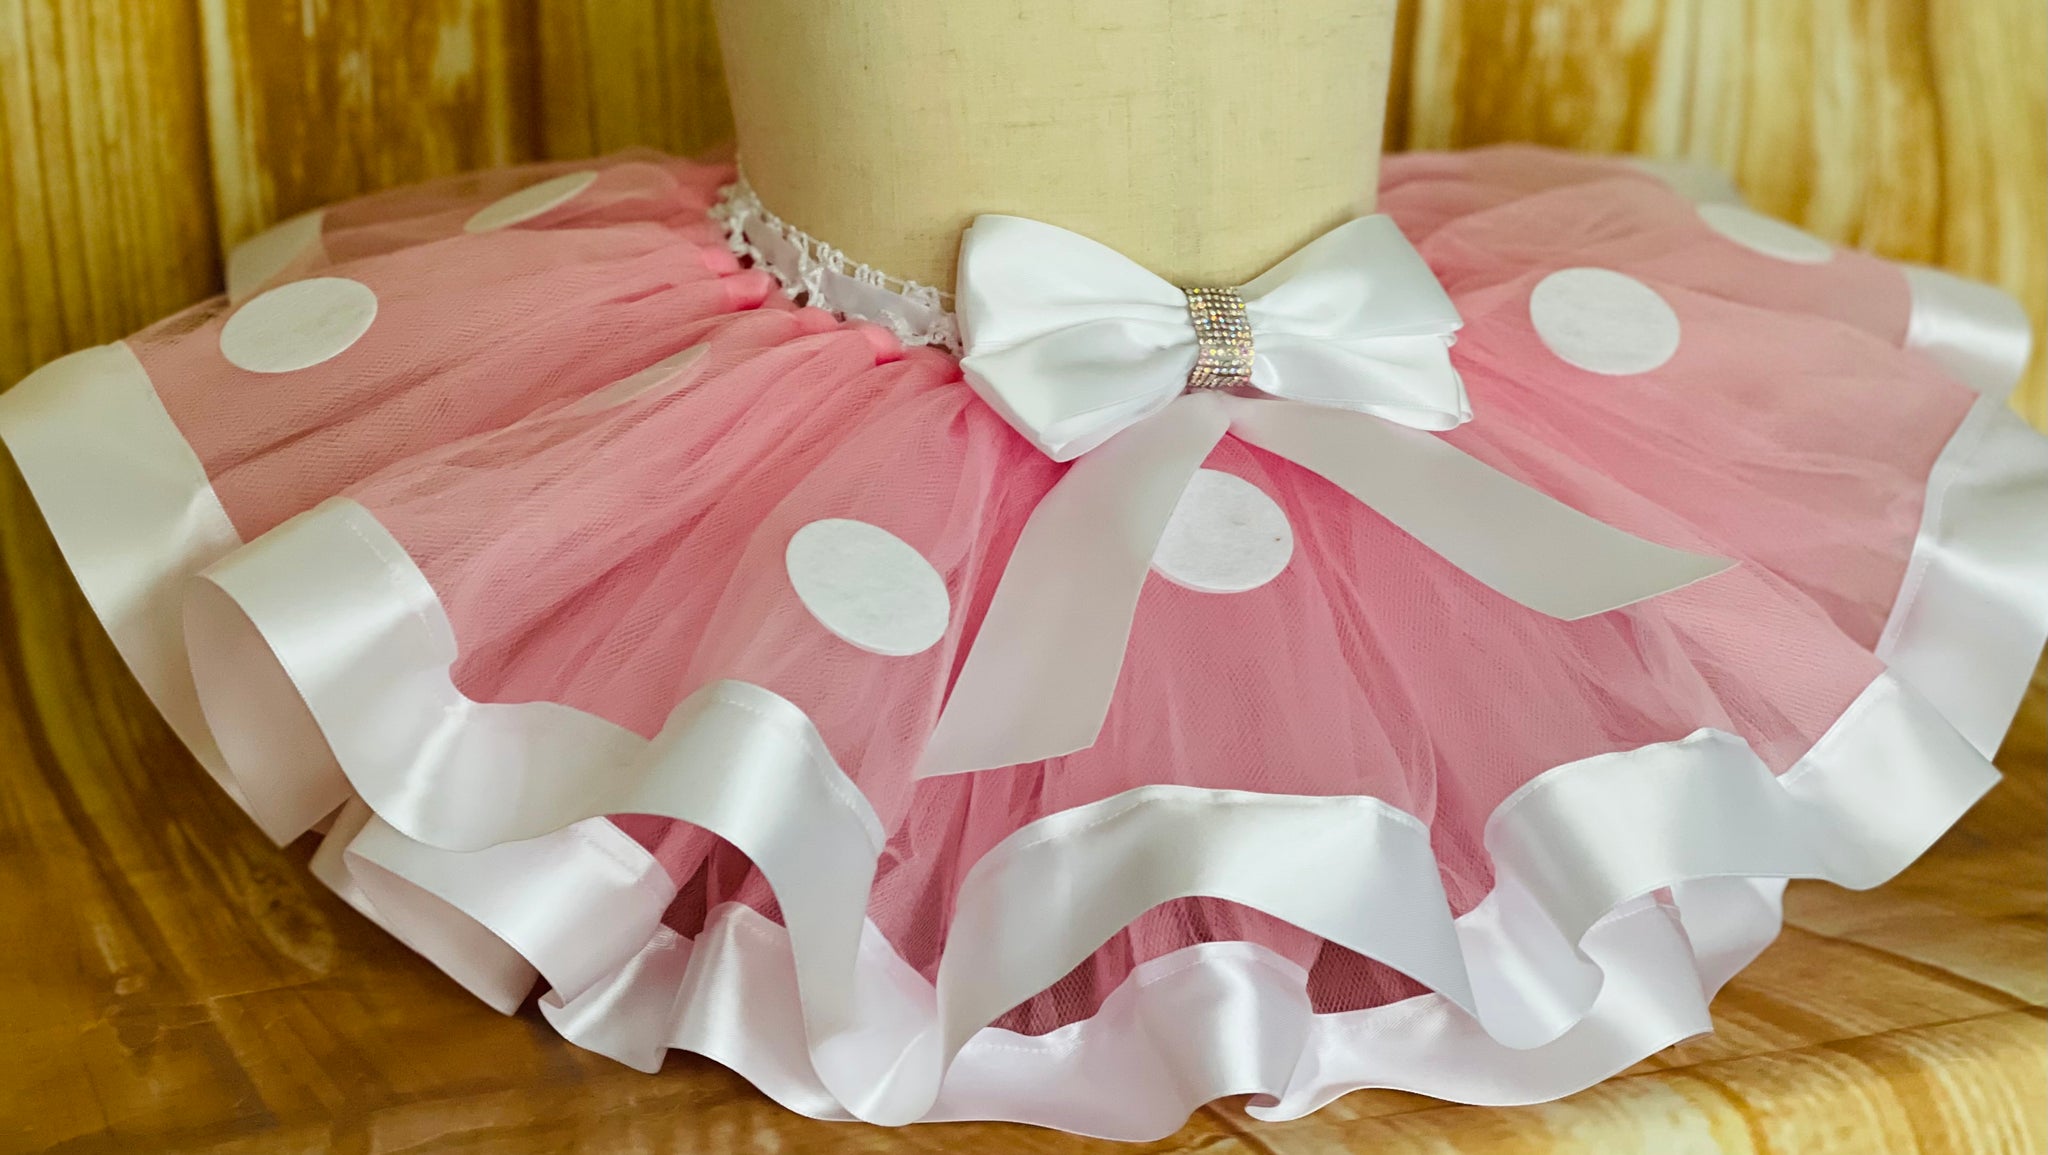 Baby Girls Pink Minnie Tutu Skirt Outfit for Kids Polka Dots Princess  Costumes for Birthday Party